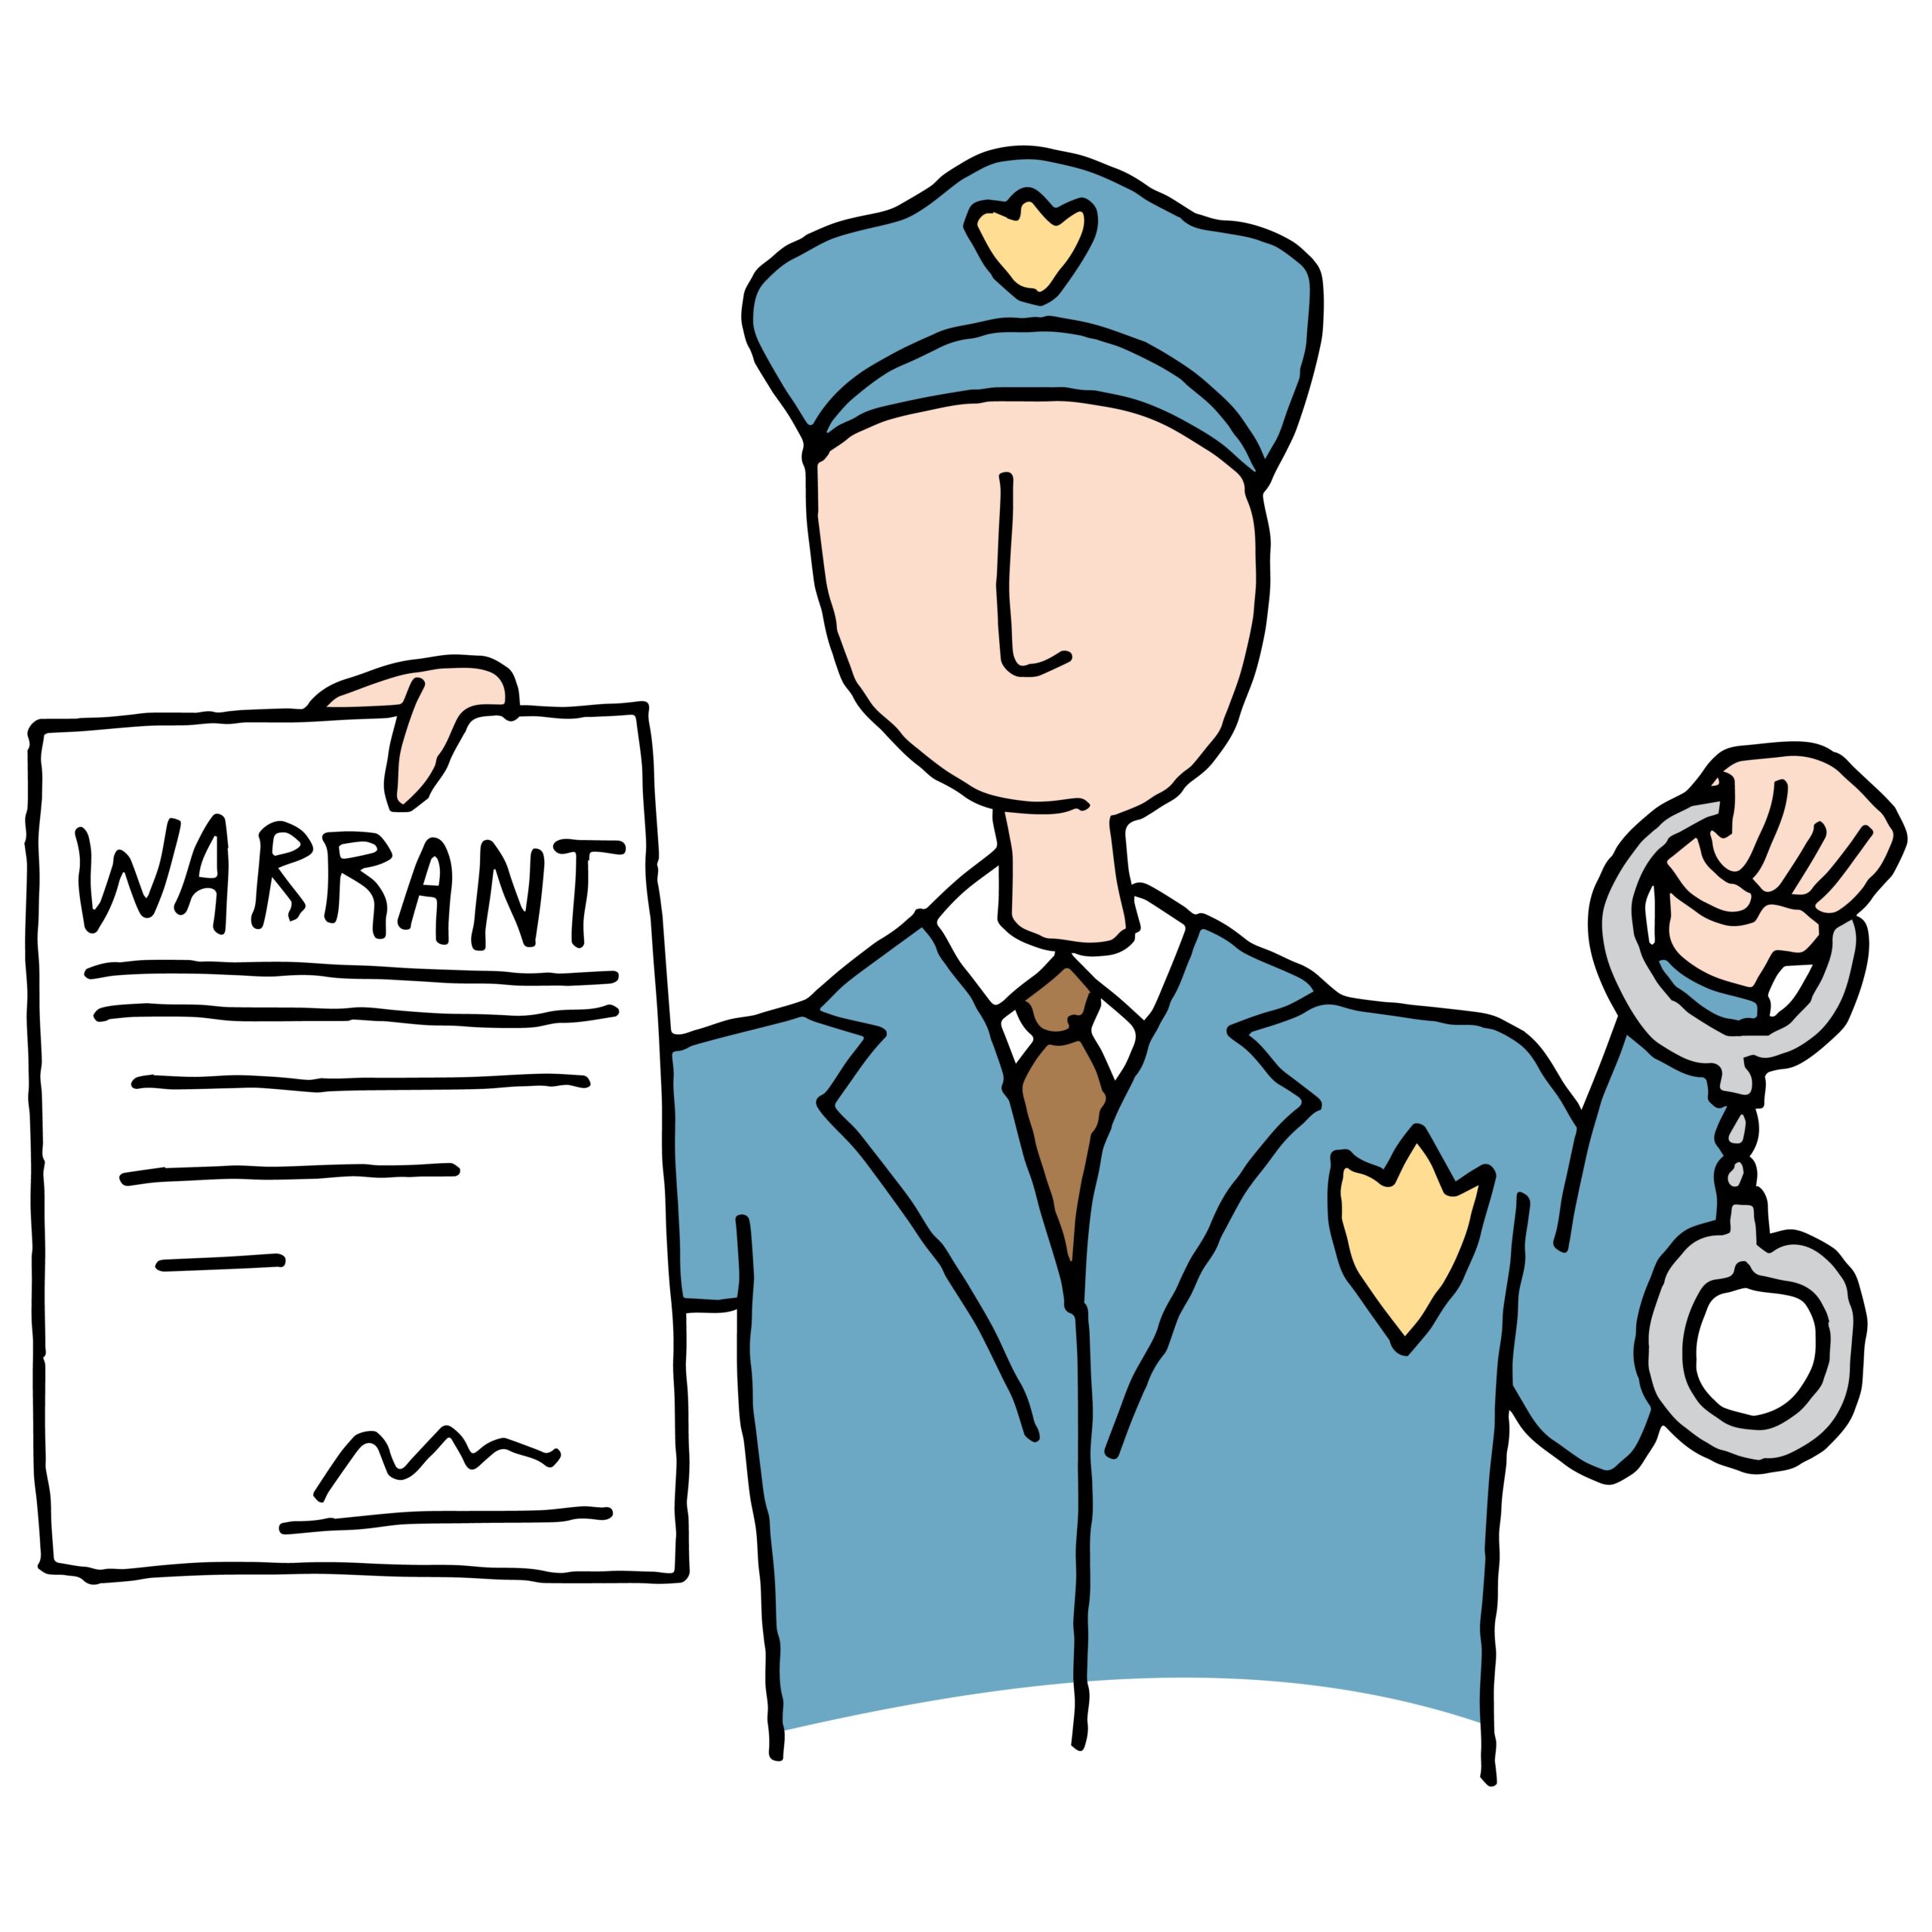 What To Do If There Is A Warrant For Your Arrest